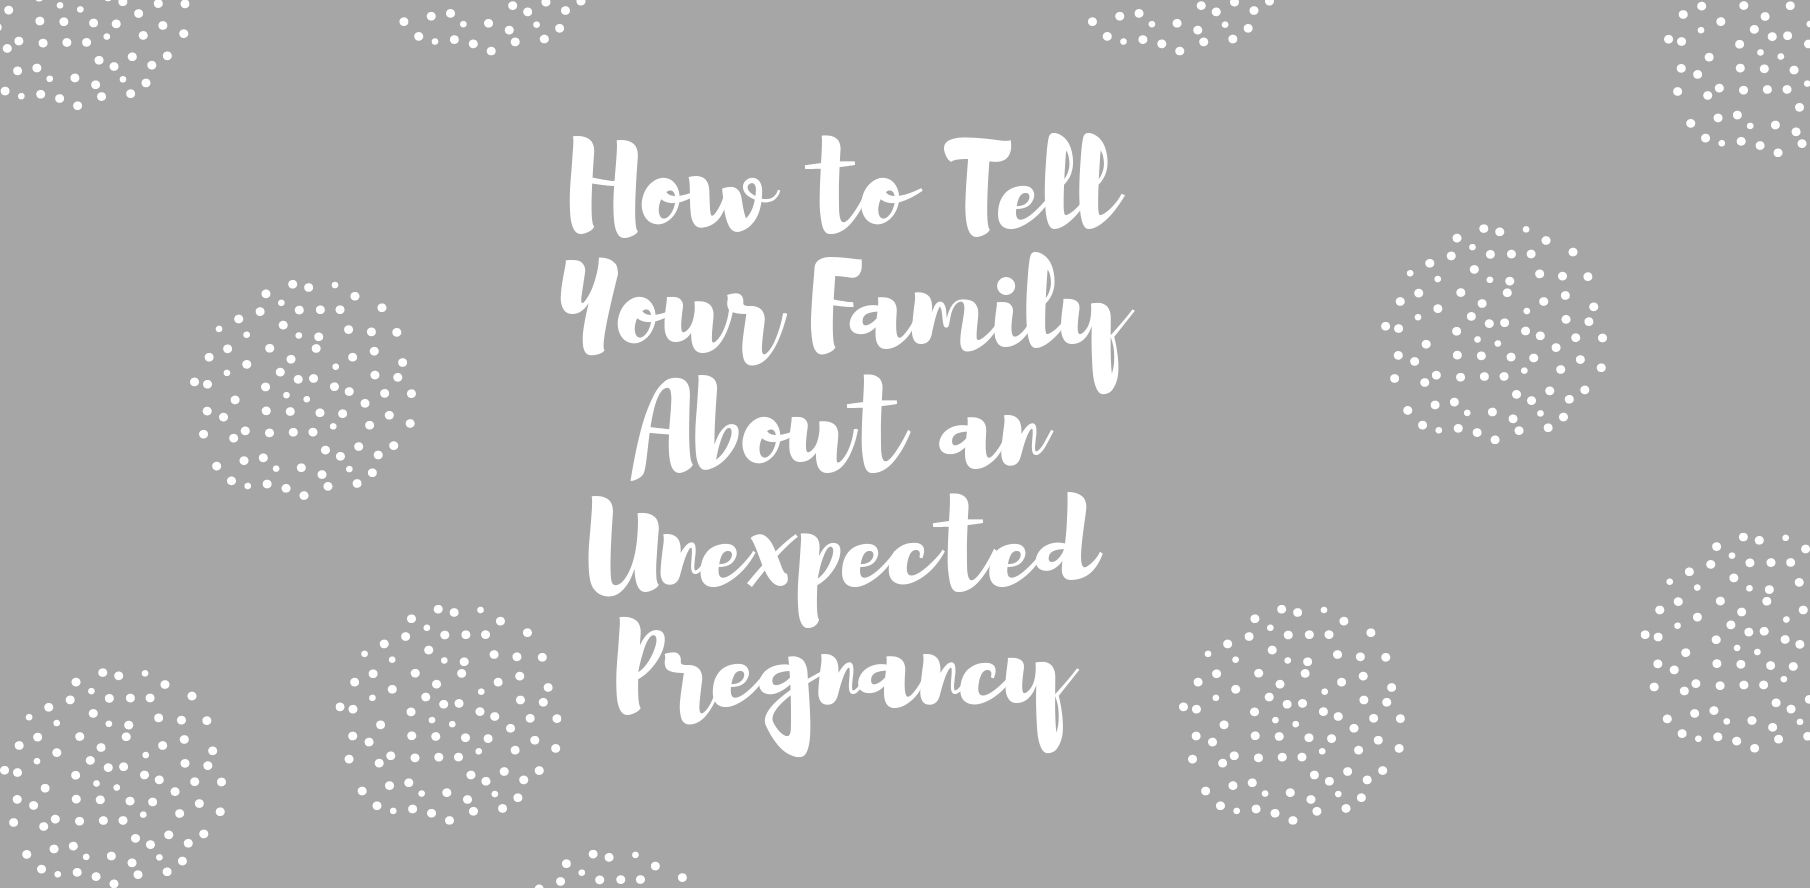 how to tell your family about an unexpected pregnancy